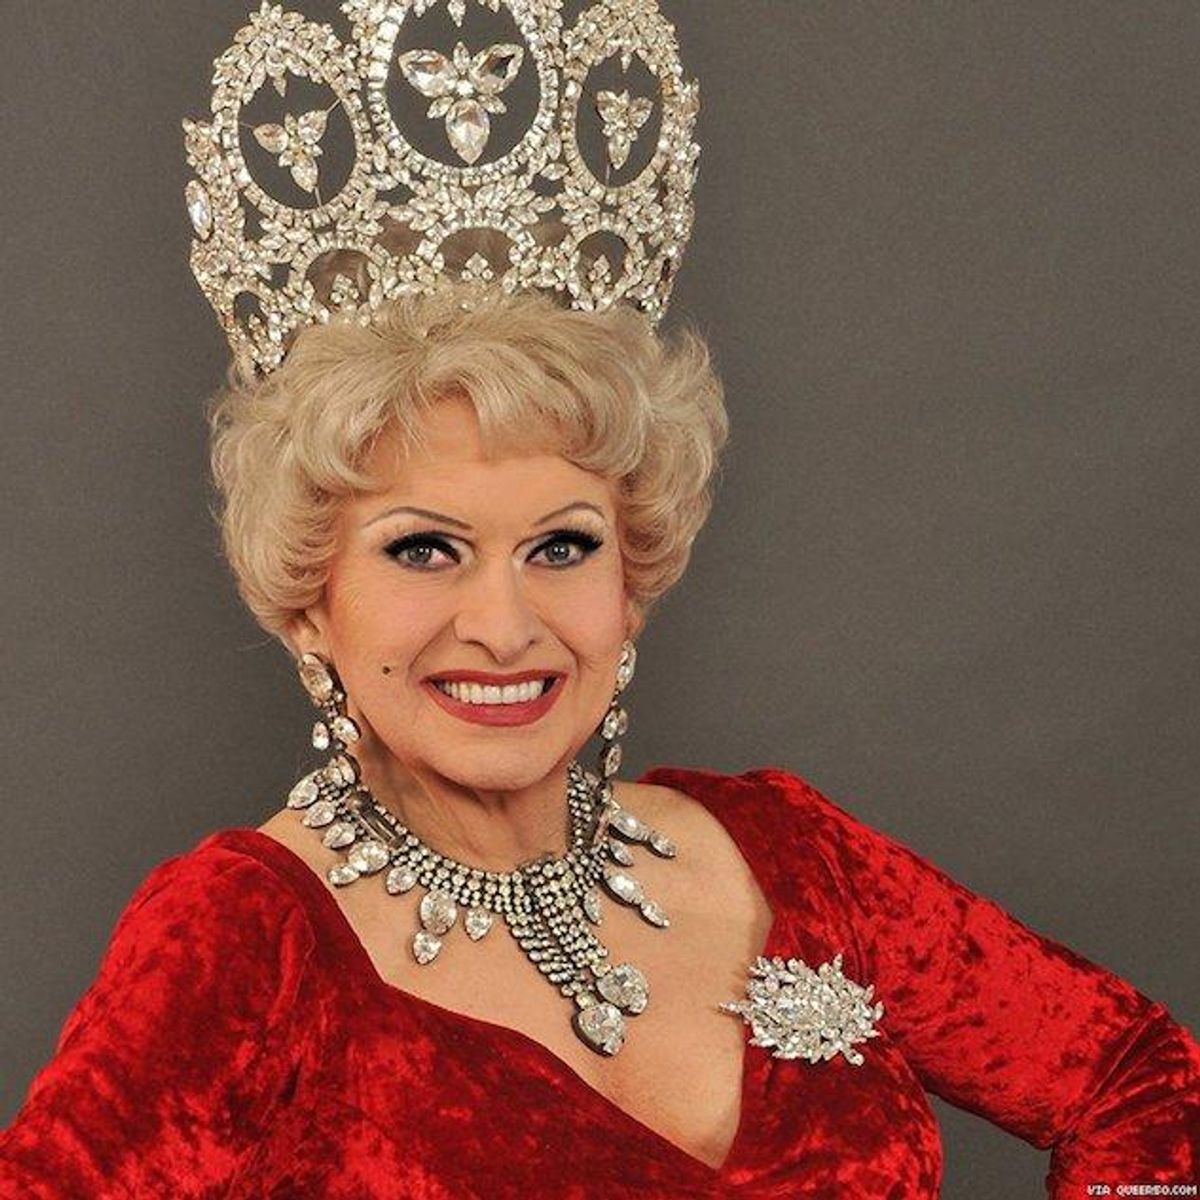 Toronto Resident Named 'World's Oldest Performing Drag Queen'